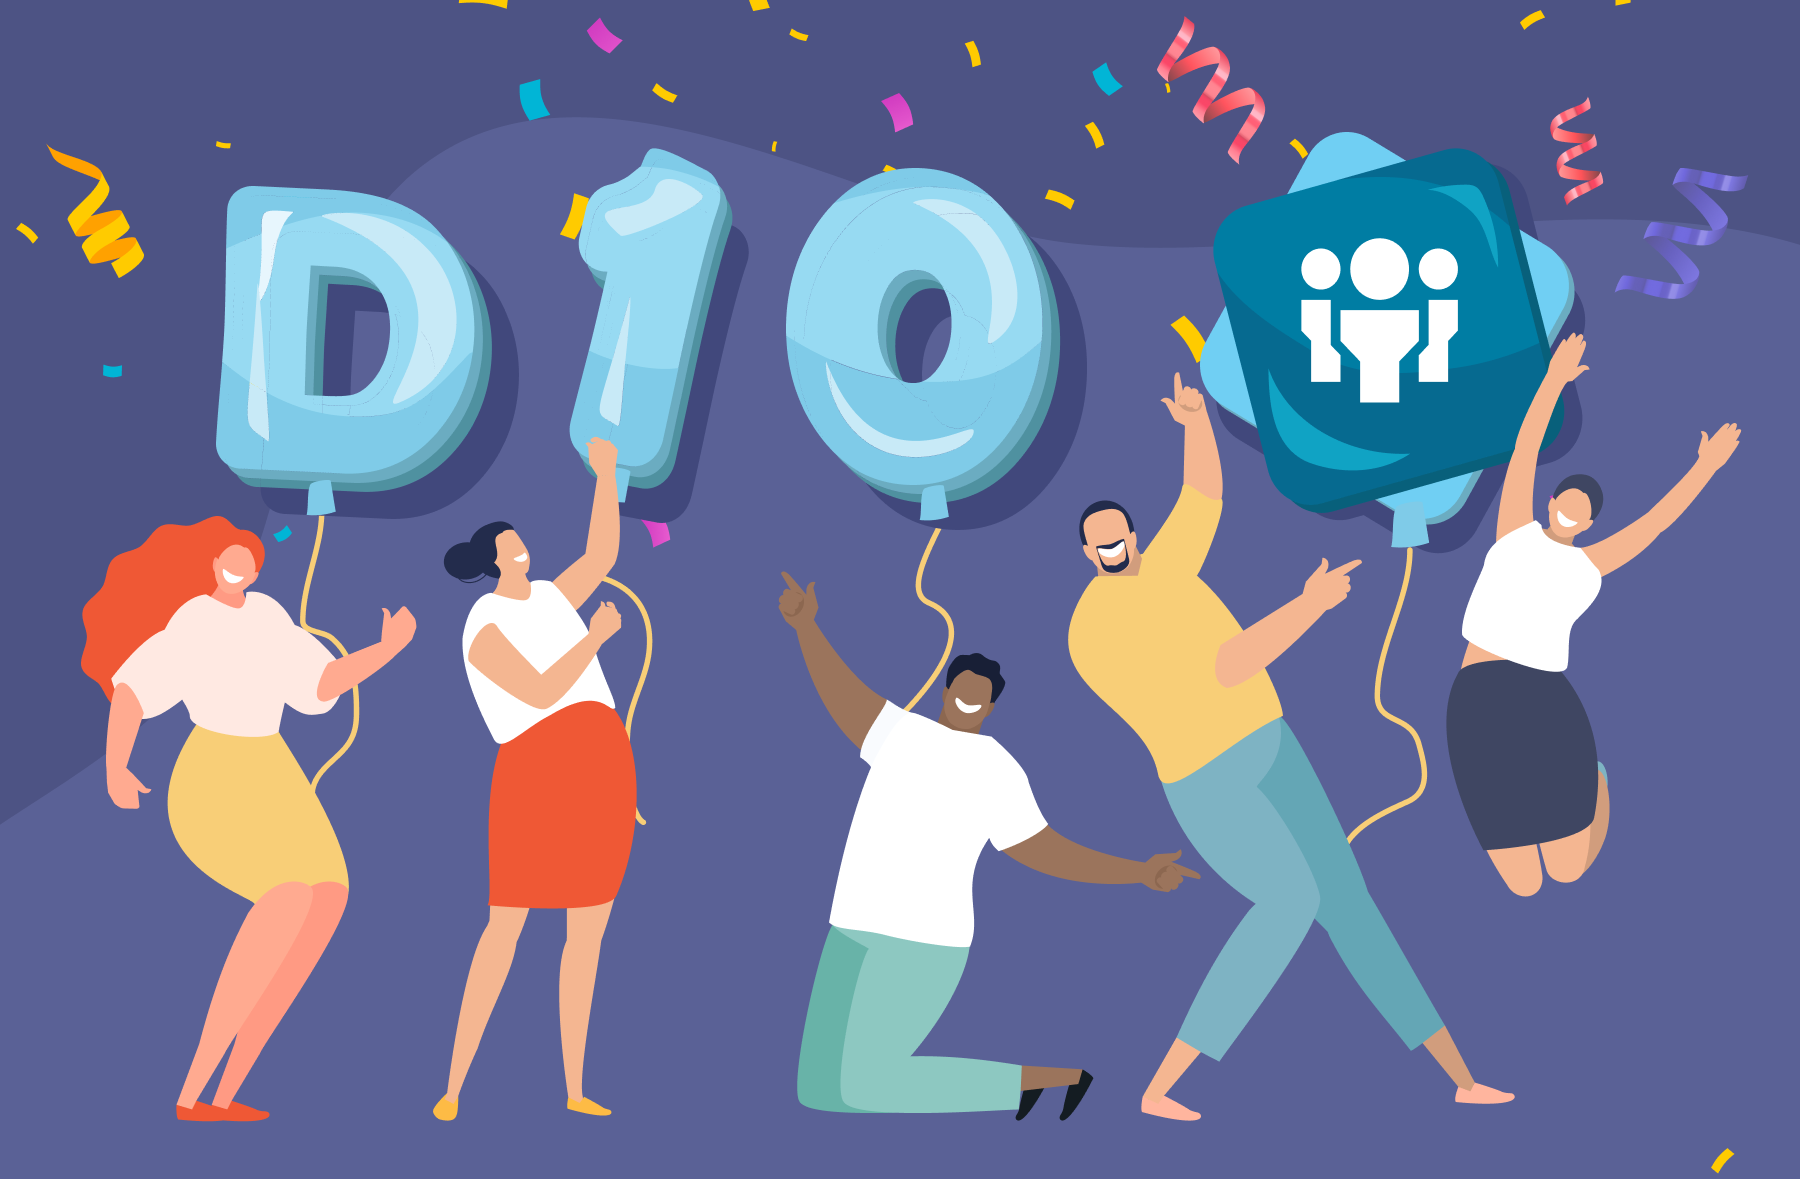 People in joy with balloons of D, 1, 0 and CivicTheme logo and confetti in the background